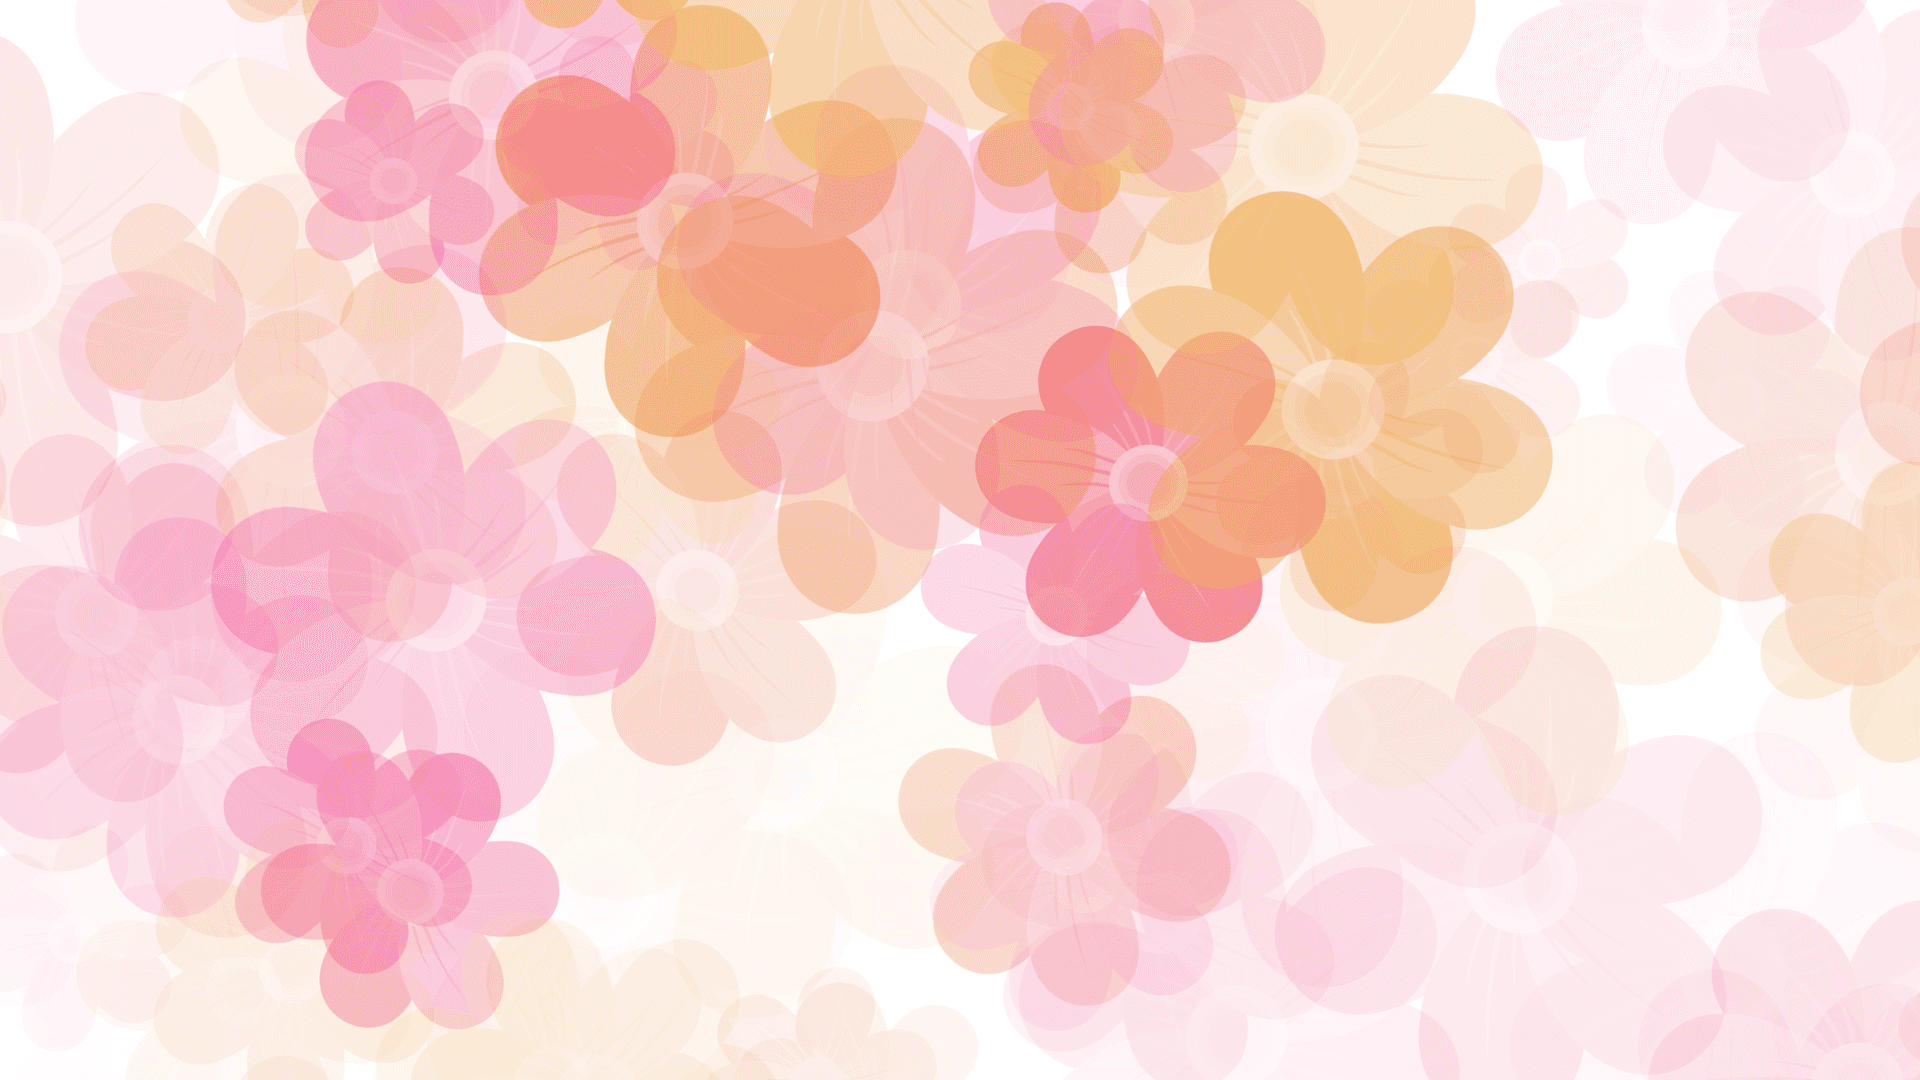 A Pink And Orange Flower Pattern On A White Background